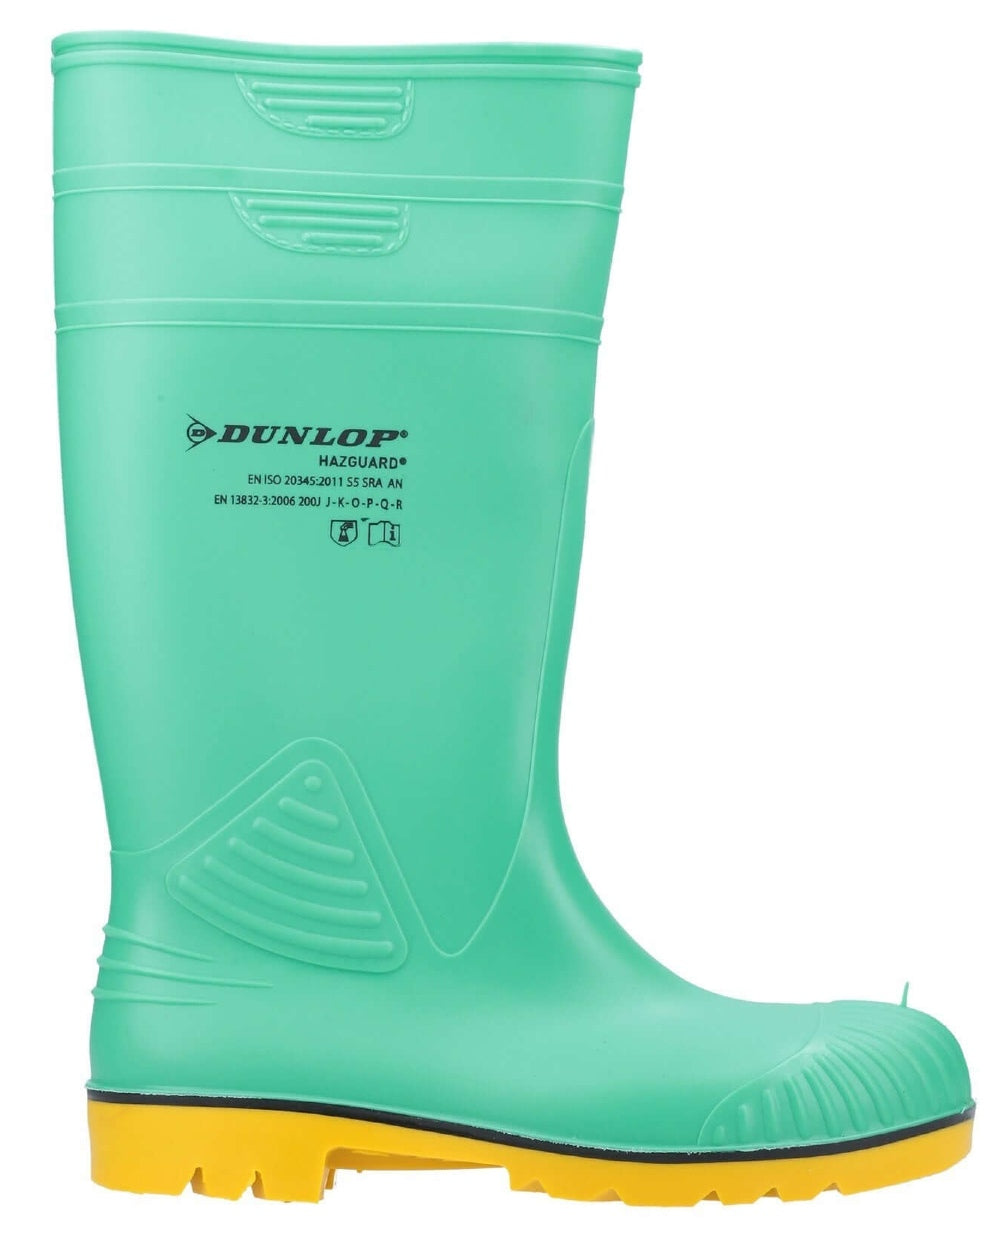 Green/Black/Yellow coloured Dunlop Acifort HazGuard Safety Wellingtons on white background 